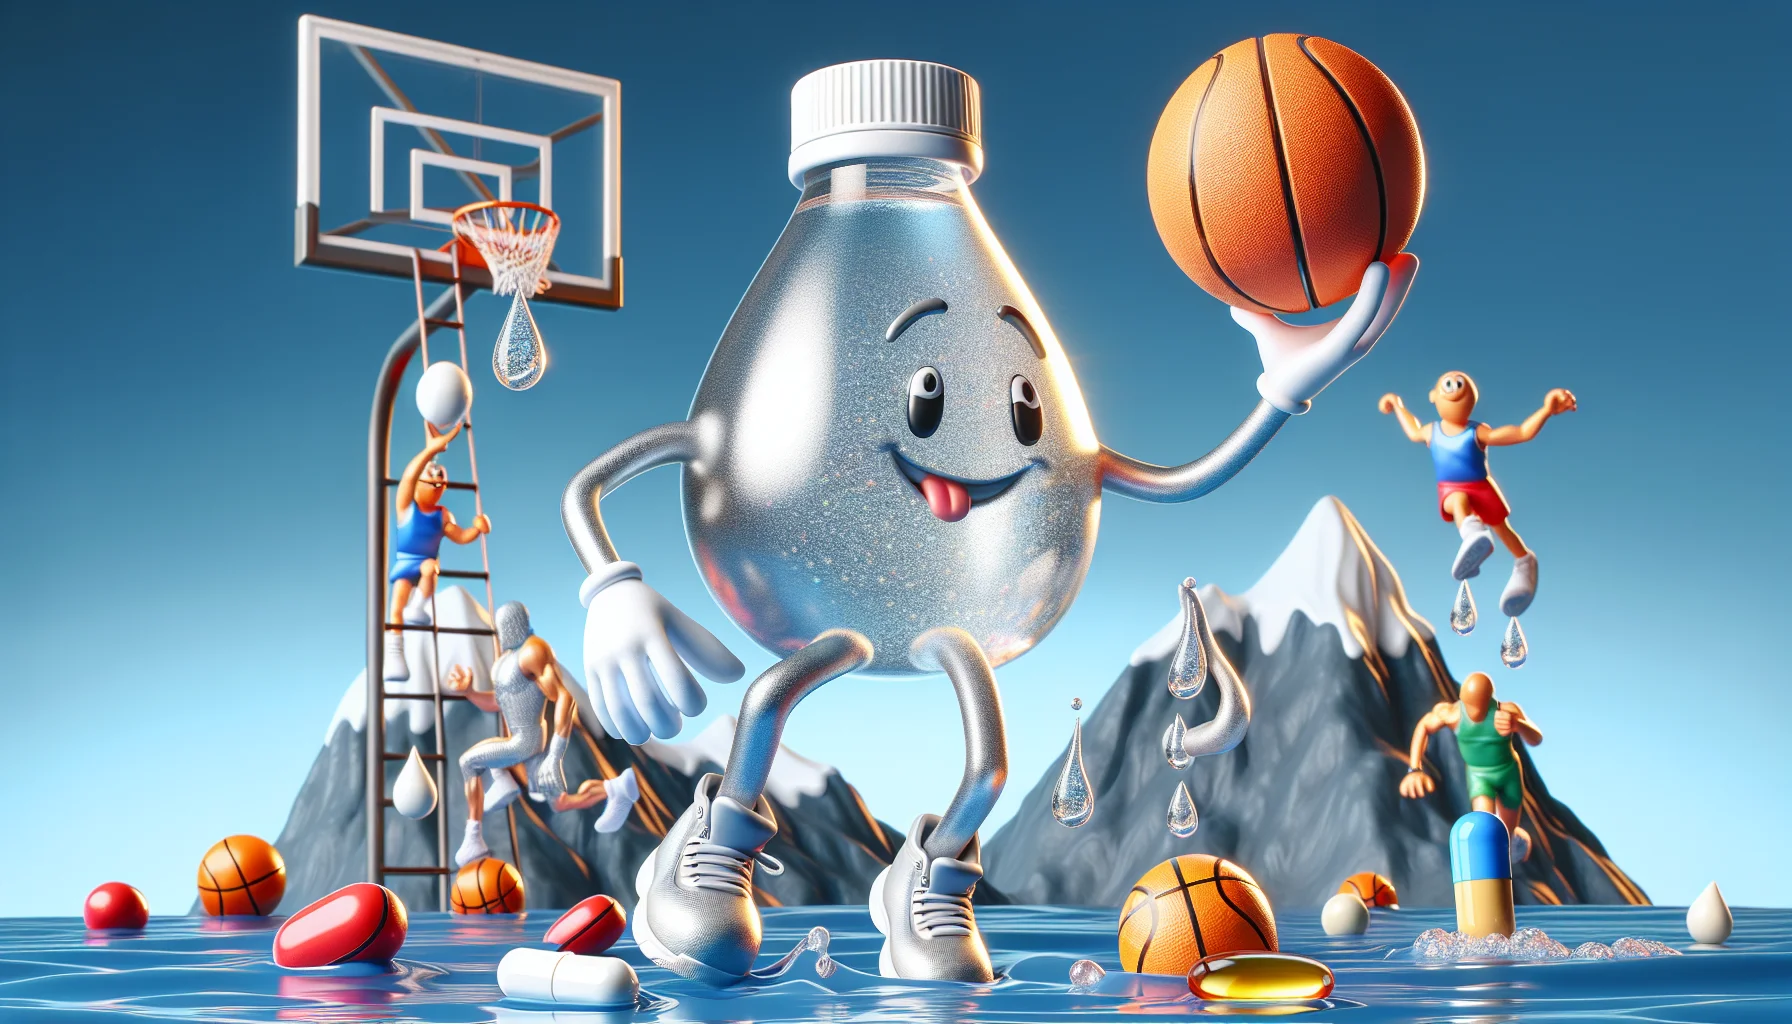 Create a whimsical scenario featuring liquid magnesium glycinate personified as a friendly, athletic character. This character, appearing as a shimmering, silver liquid, is showing off its flexibility in a variety of sports. It's seen easily dribbling a basketball around other less nimble supplement bottles in a park. Meanwhile, it's also effortlessly scaling a mountain, symbolizing rock climbing, while tablets and capsules are struggling halfway. To top it all, it's also diving into a clear pool, symbolizing swimming, leaving behind a glistening trail of bubbles. This dynamic, humorous scene should entice viewers about the benefits of using sports supplements.